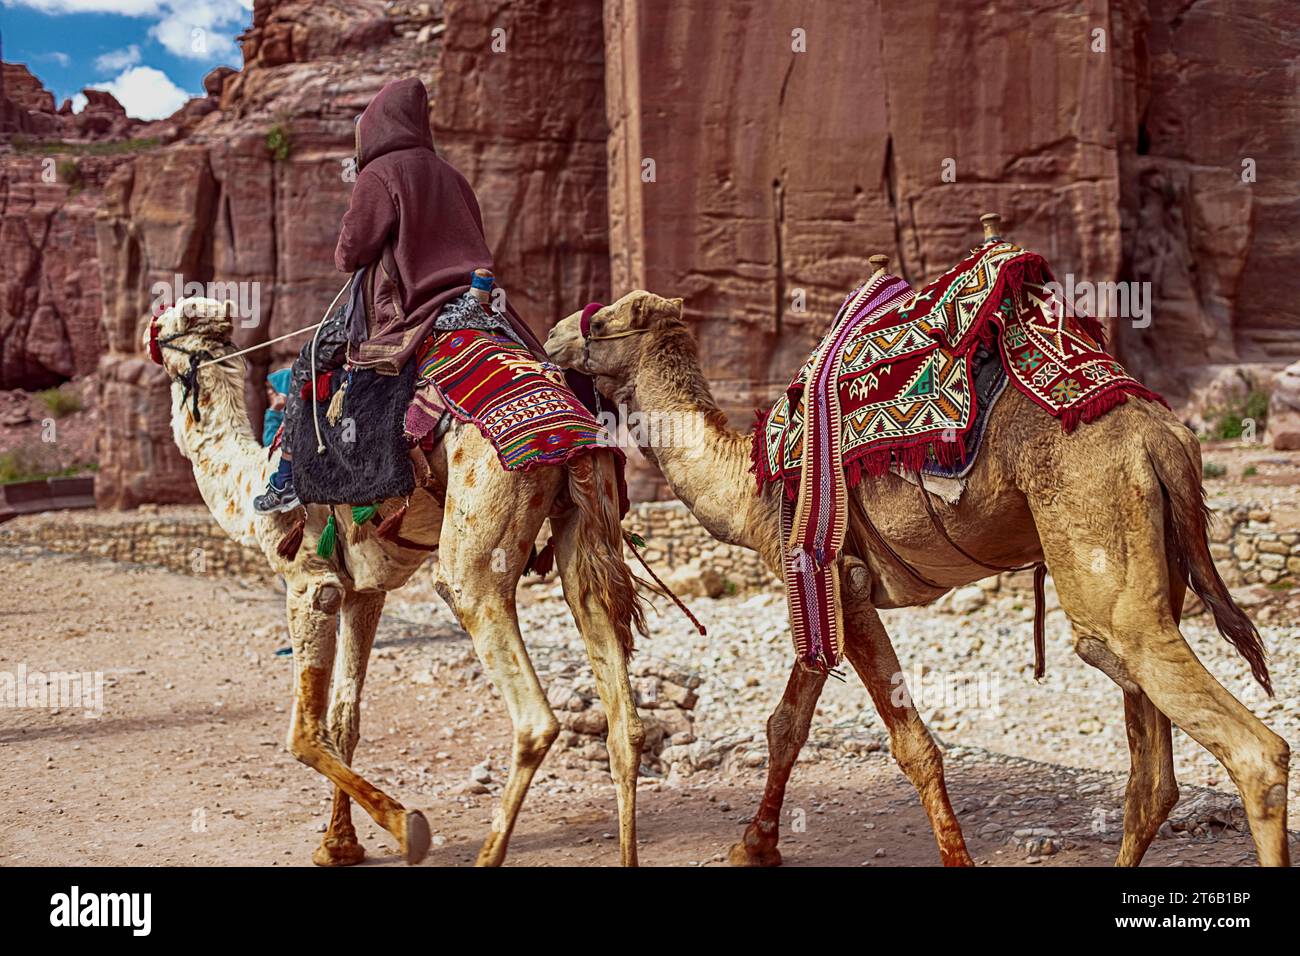 Tourists riding camels ride along the Siq Canyon and explore the attractions of the city of Petra, Jordan Stock Photo